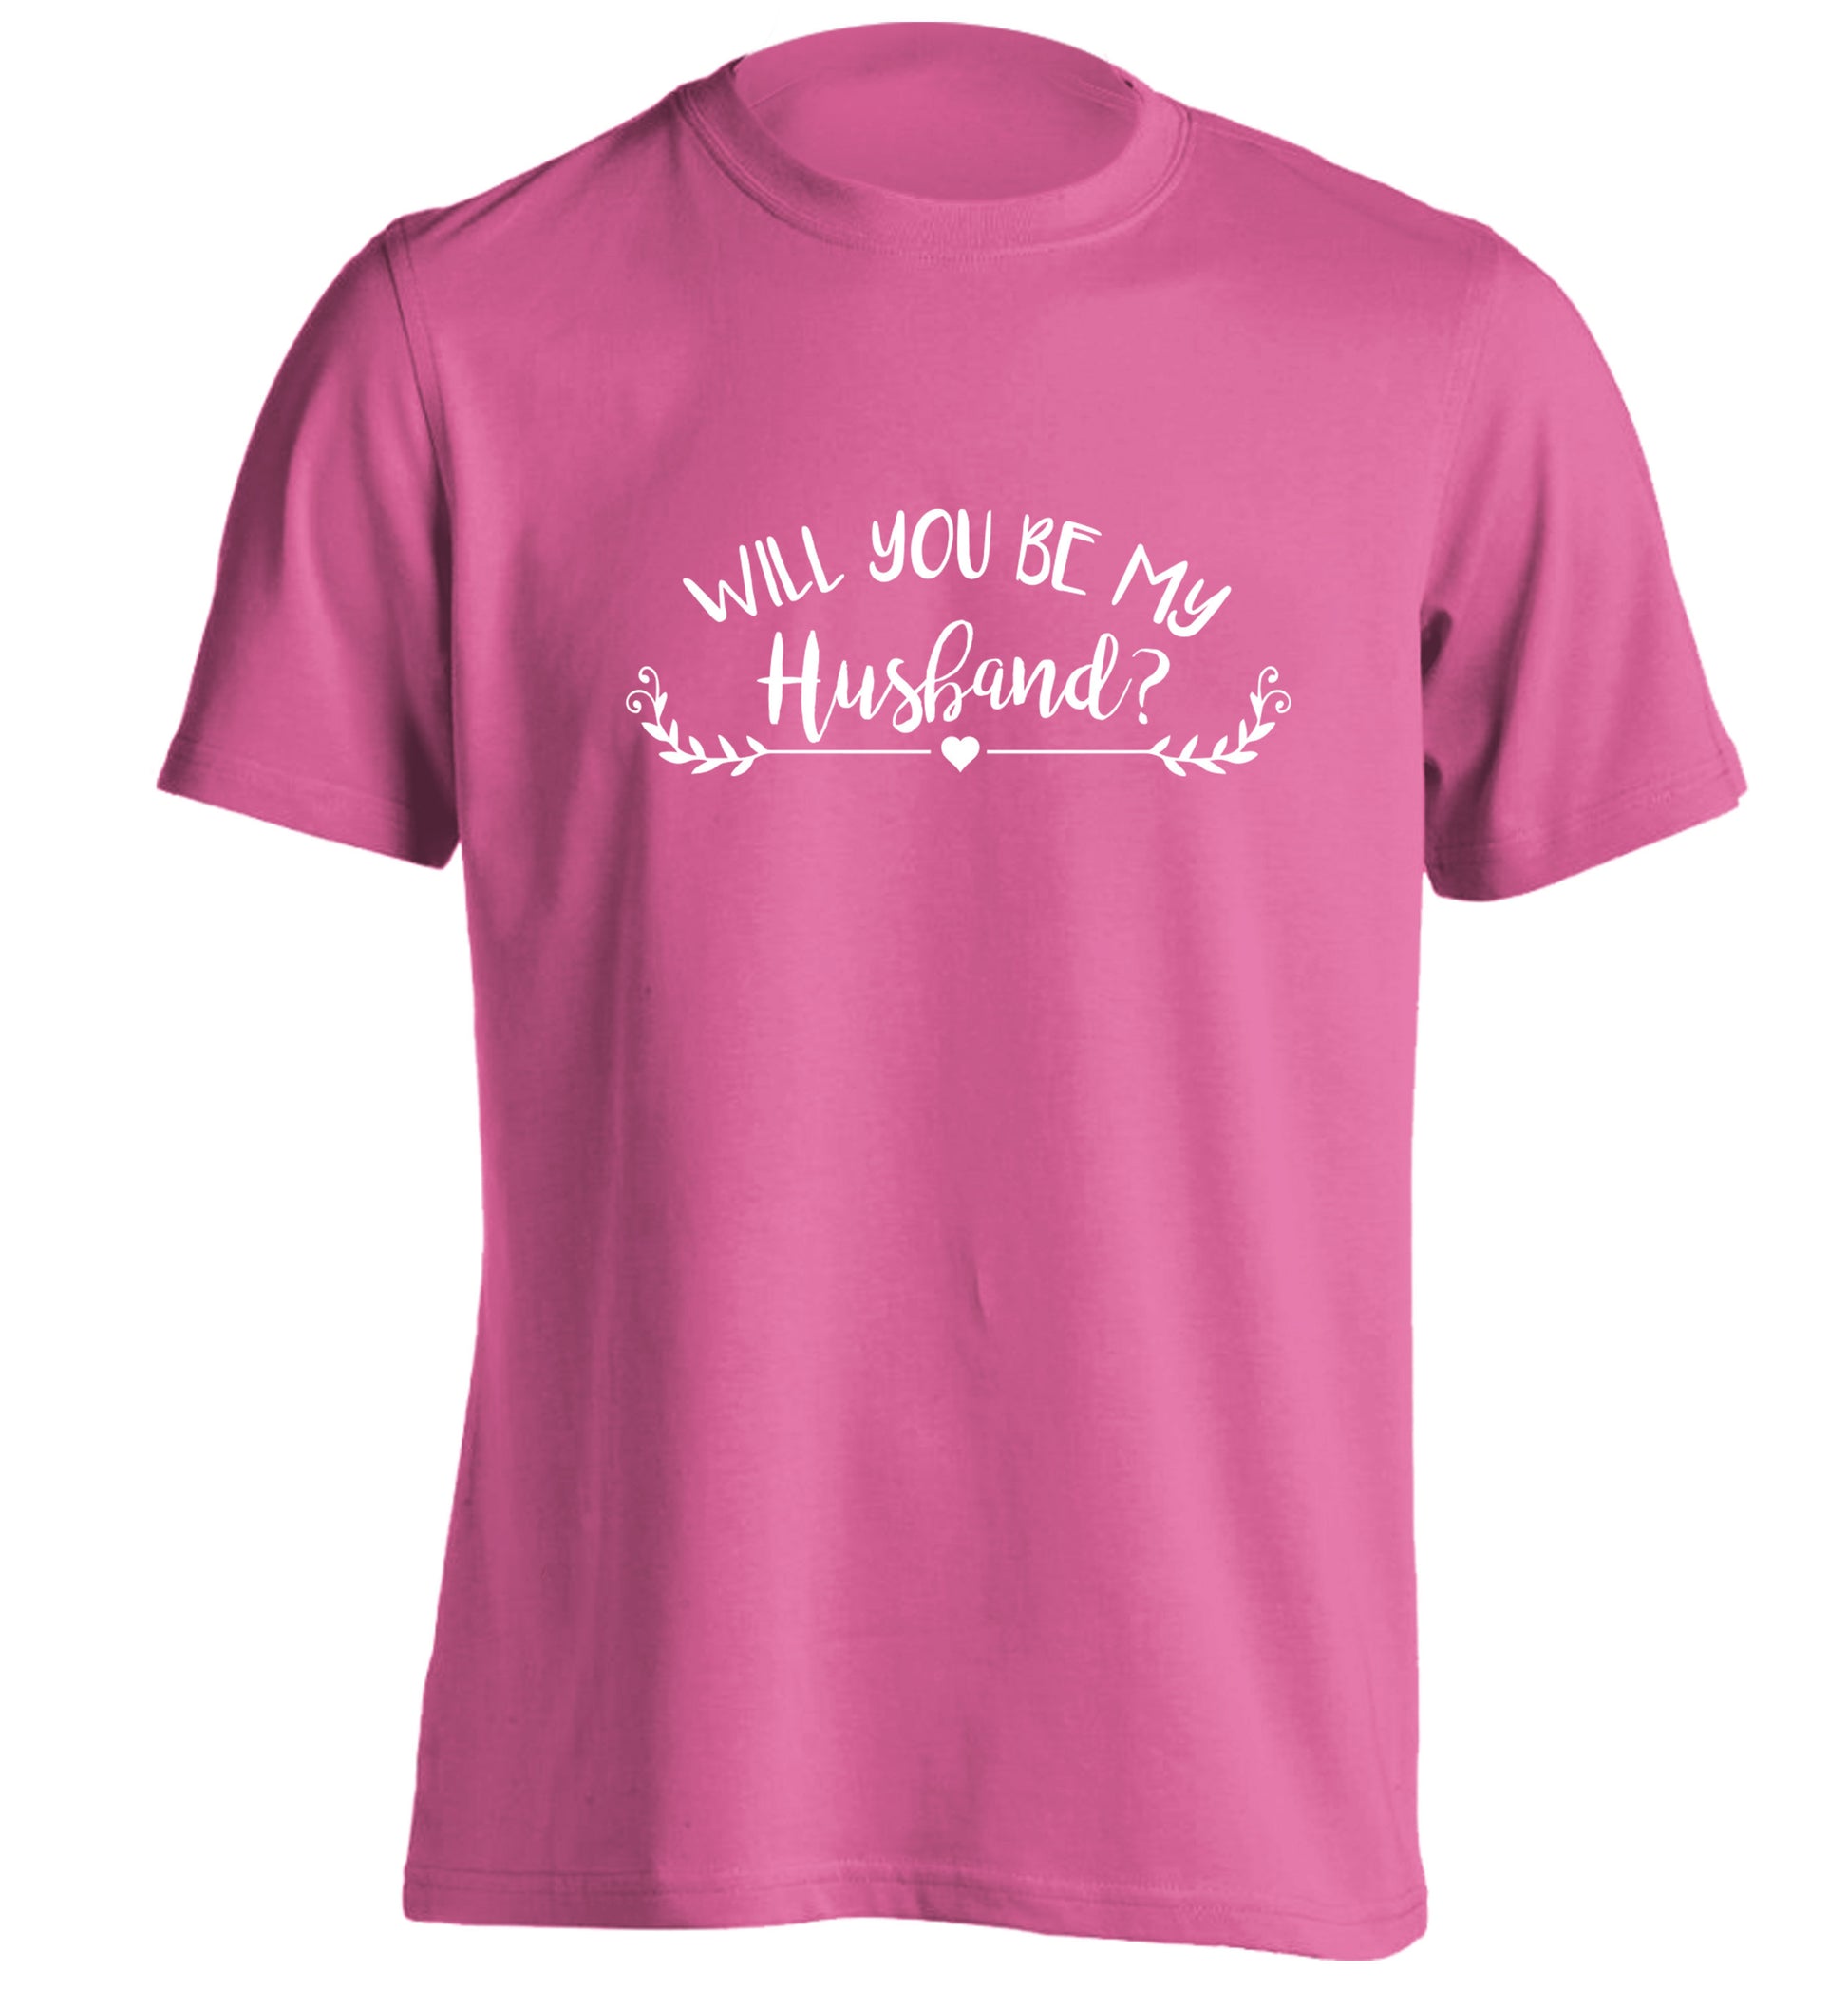 Will you be my husband? adults unisex pink Tshirt 2XL